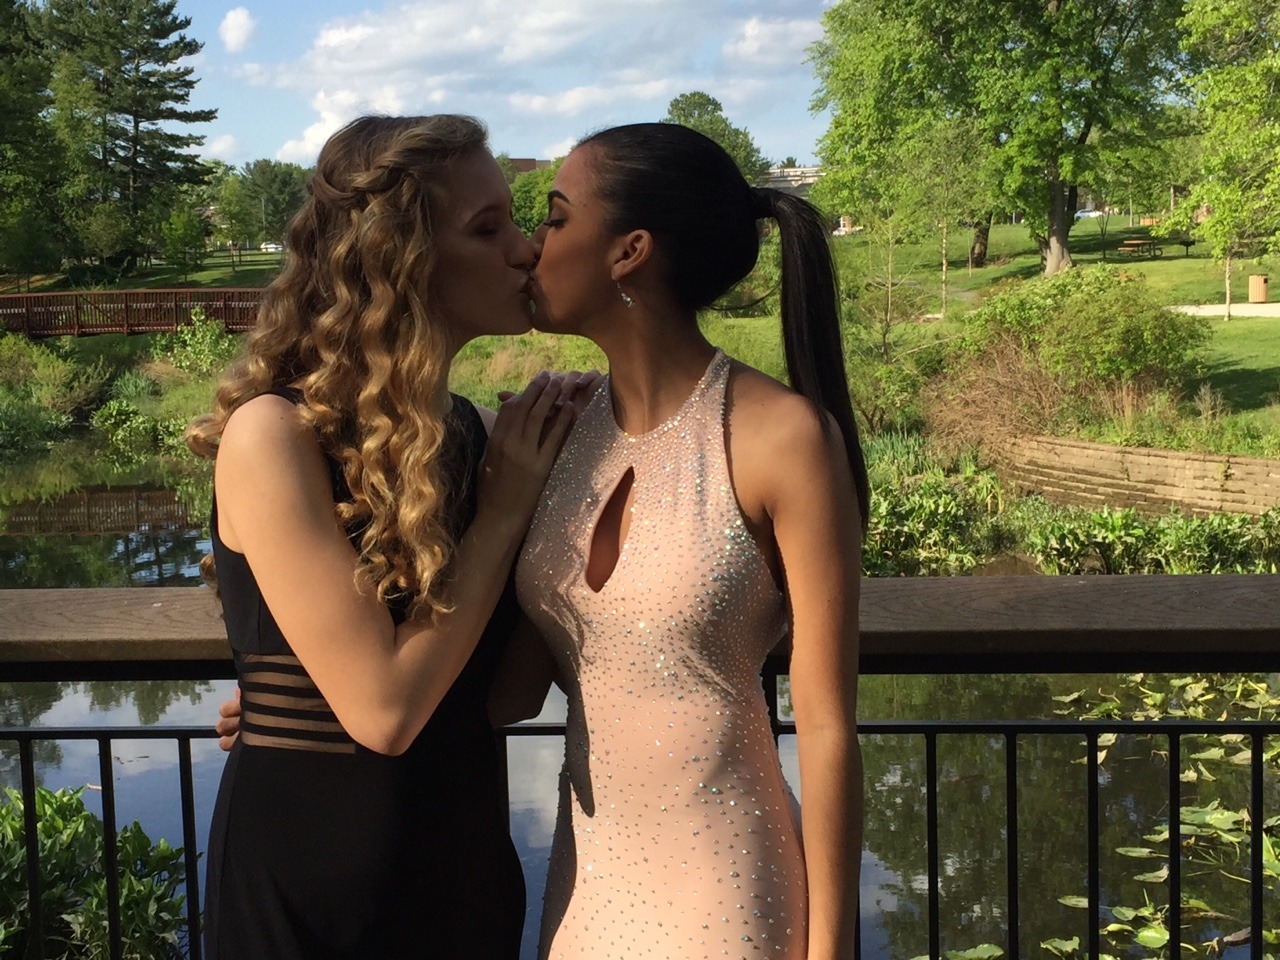 Mississippi prom canceled over lesbian fear.